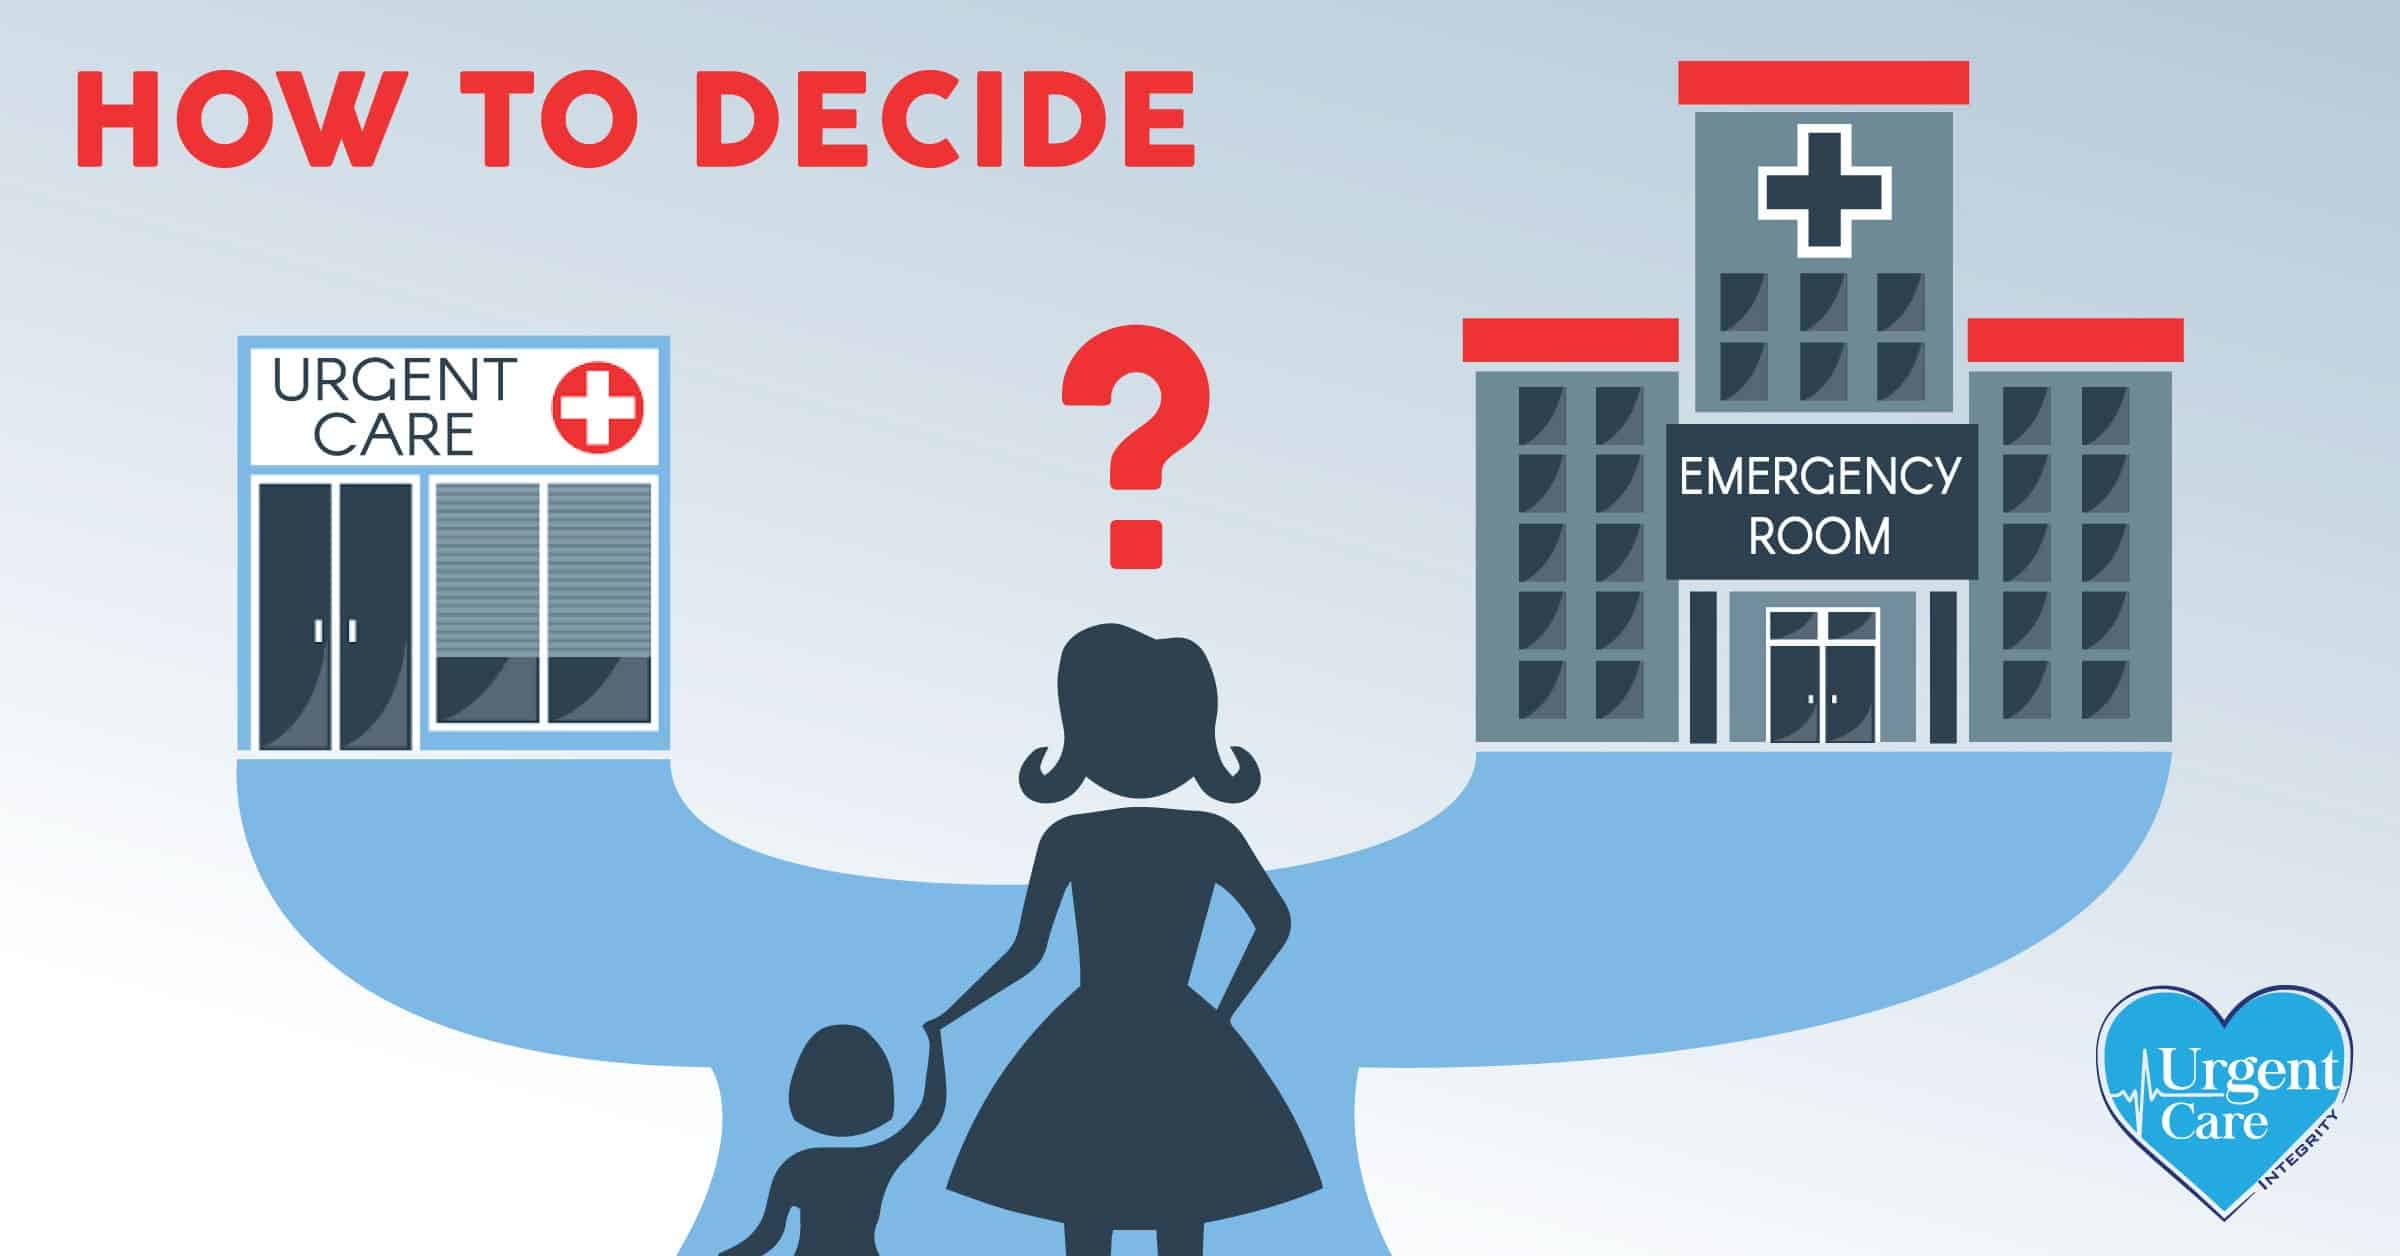 Urgent Care Centers vs. Emergency Rooms - What's the Difference